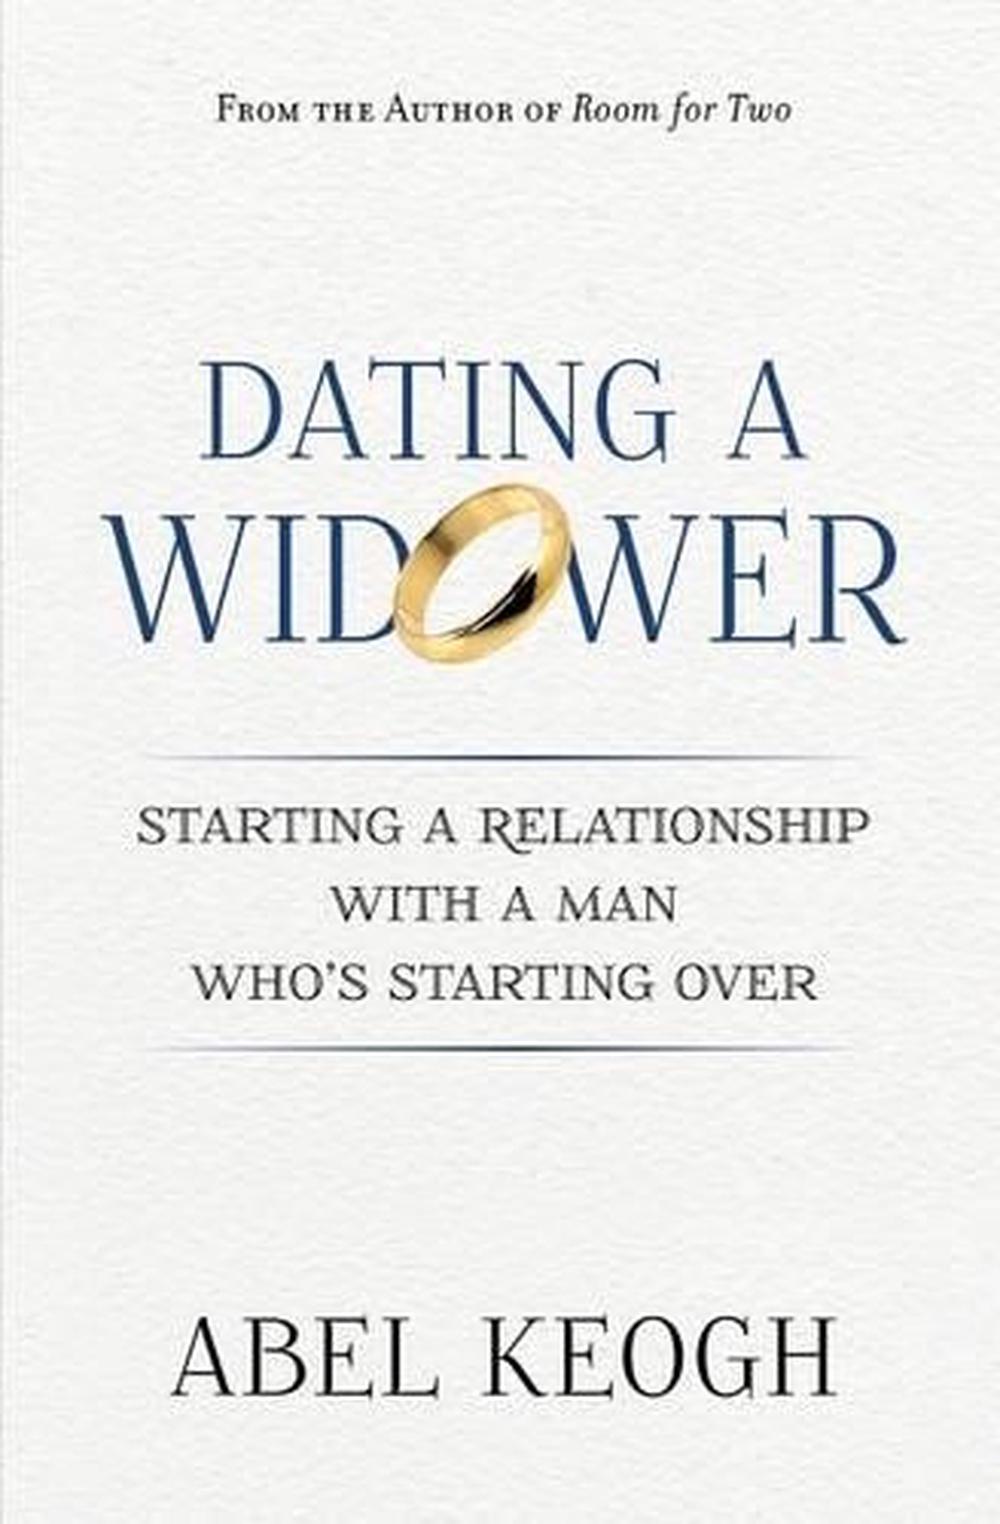 Dating a Widower Starting a Relationship with a Man Who's Starting